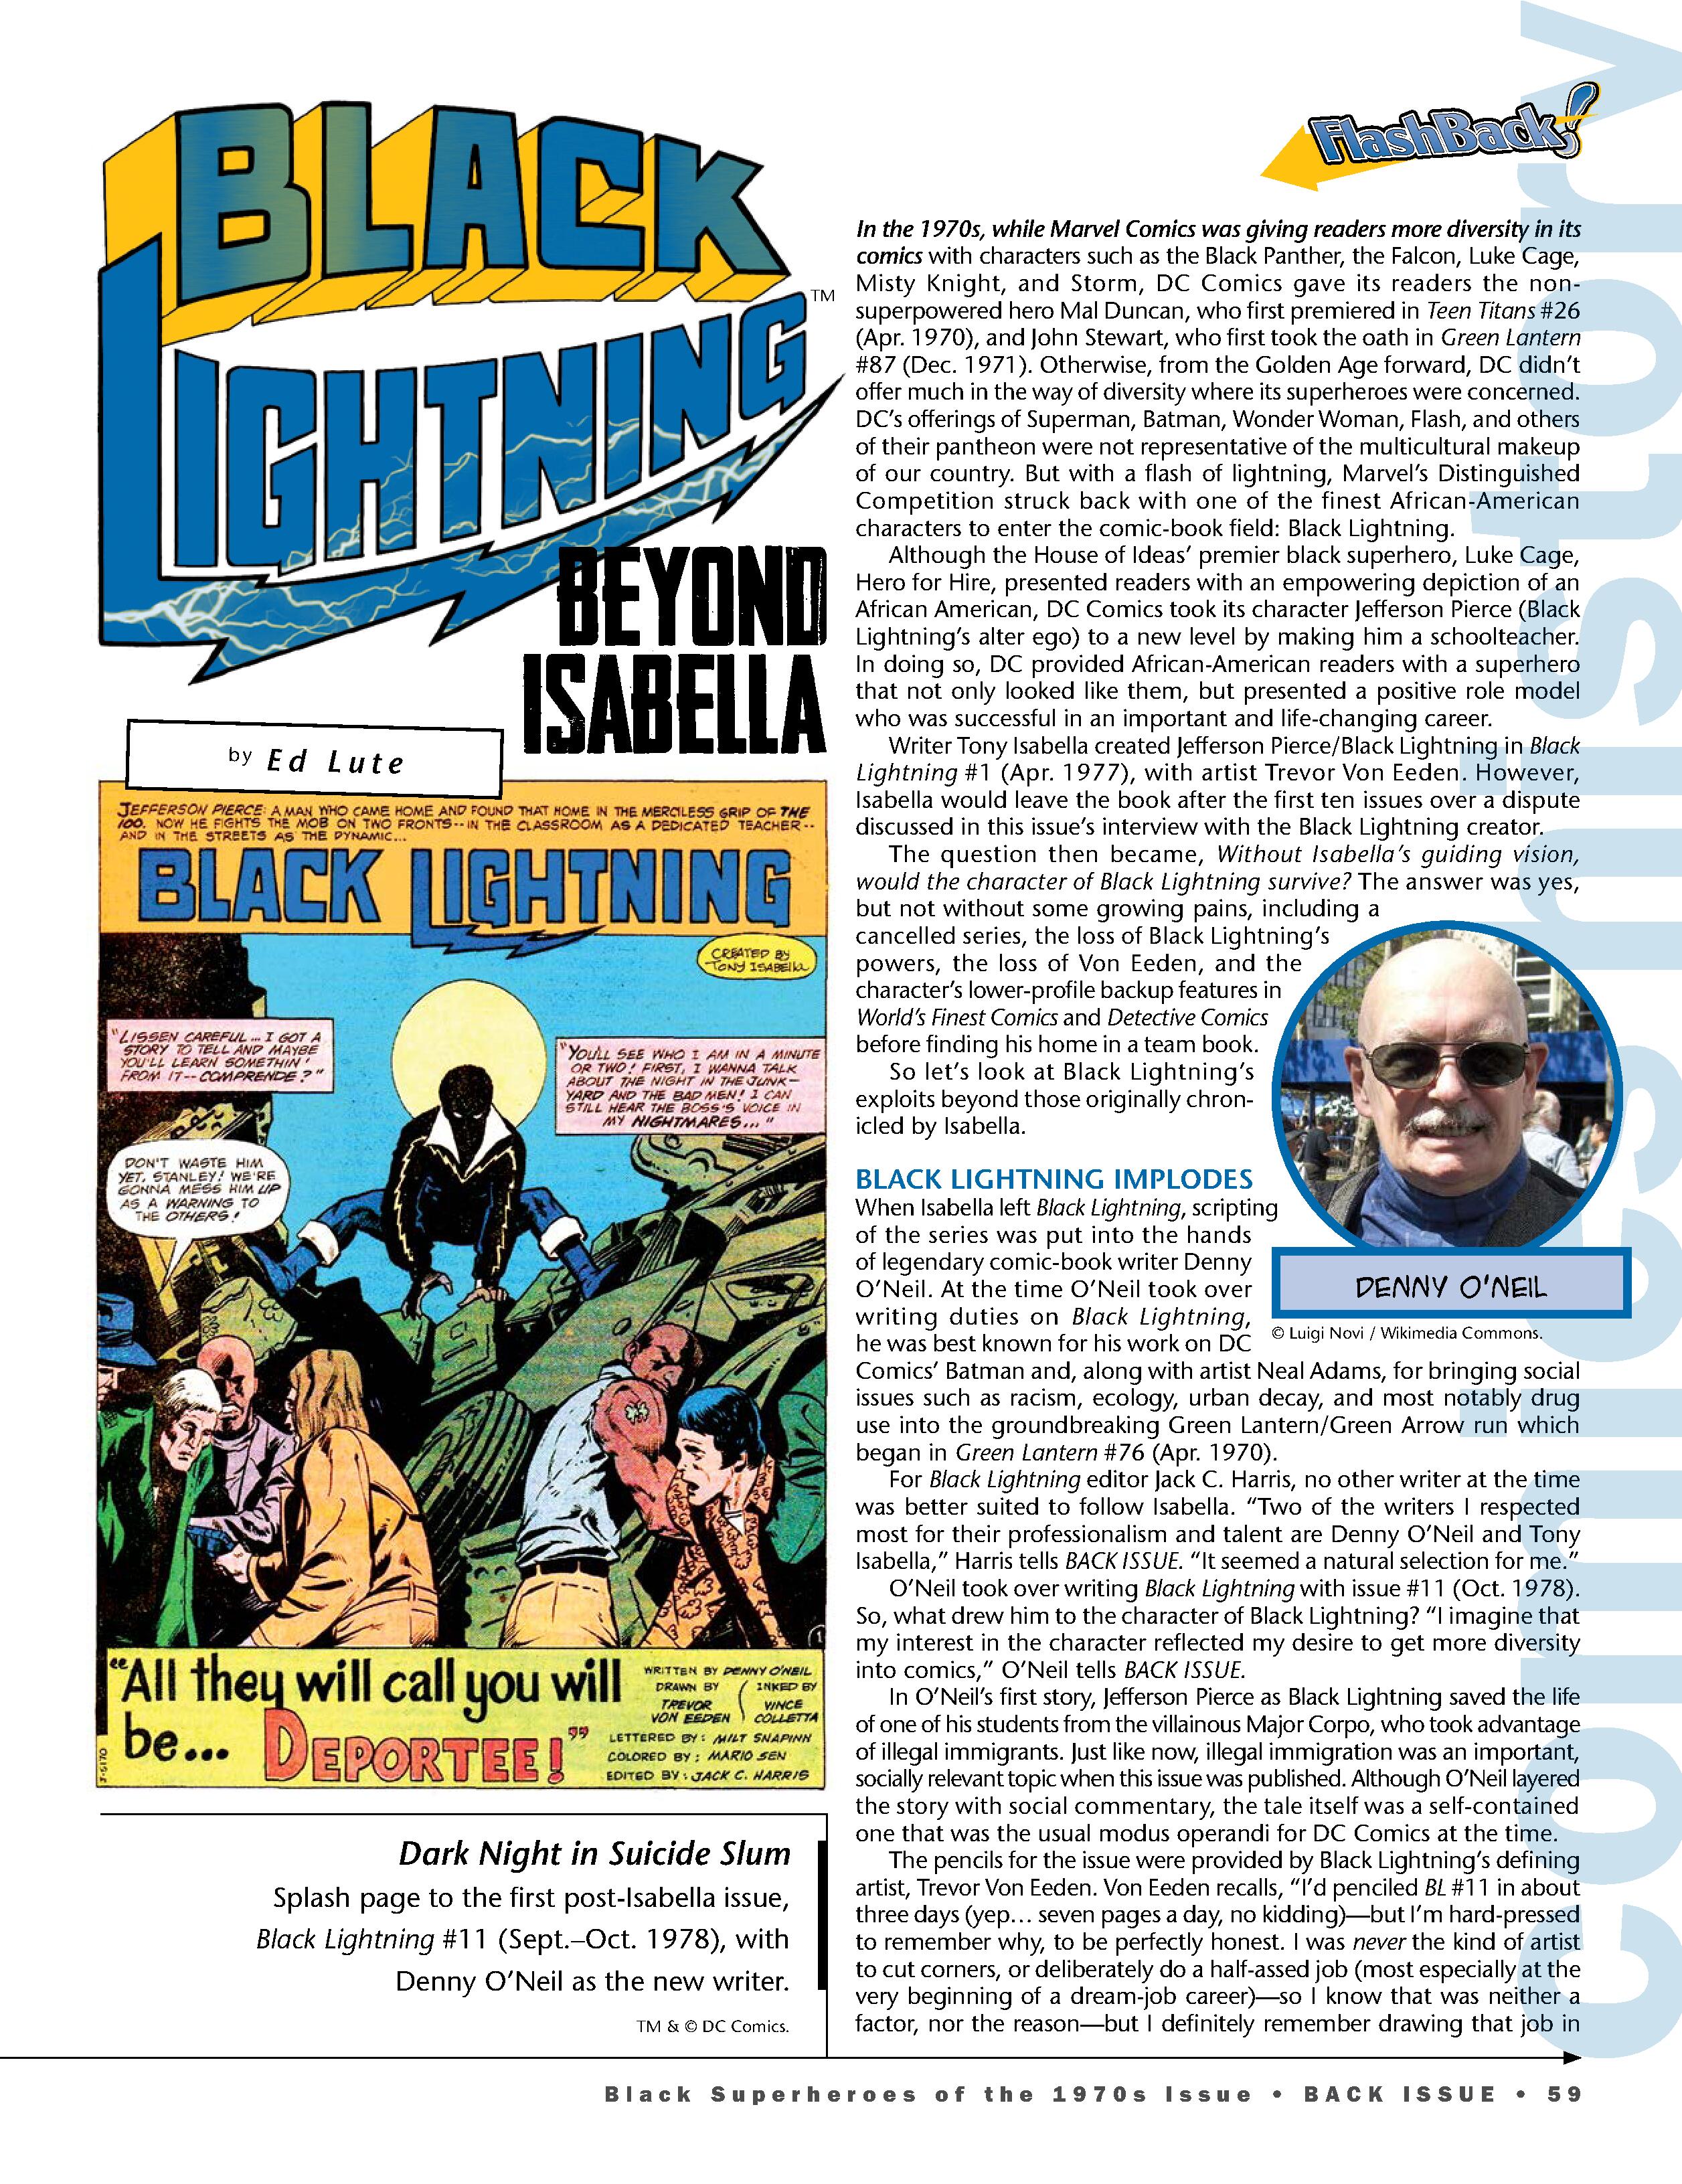 Read online Back Issue comic -  Issue #114 - 61